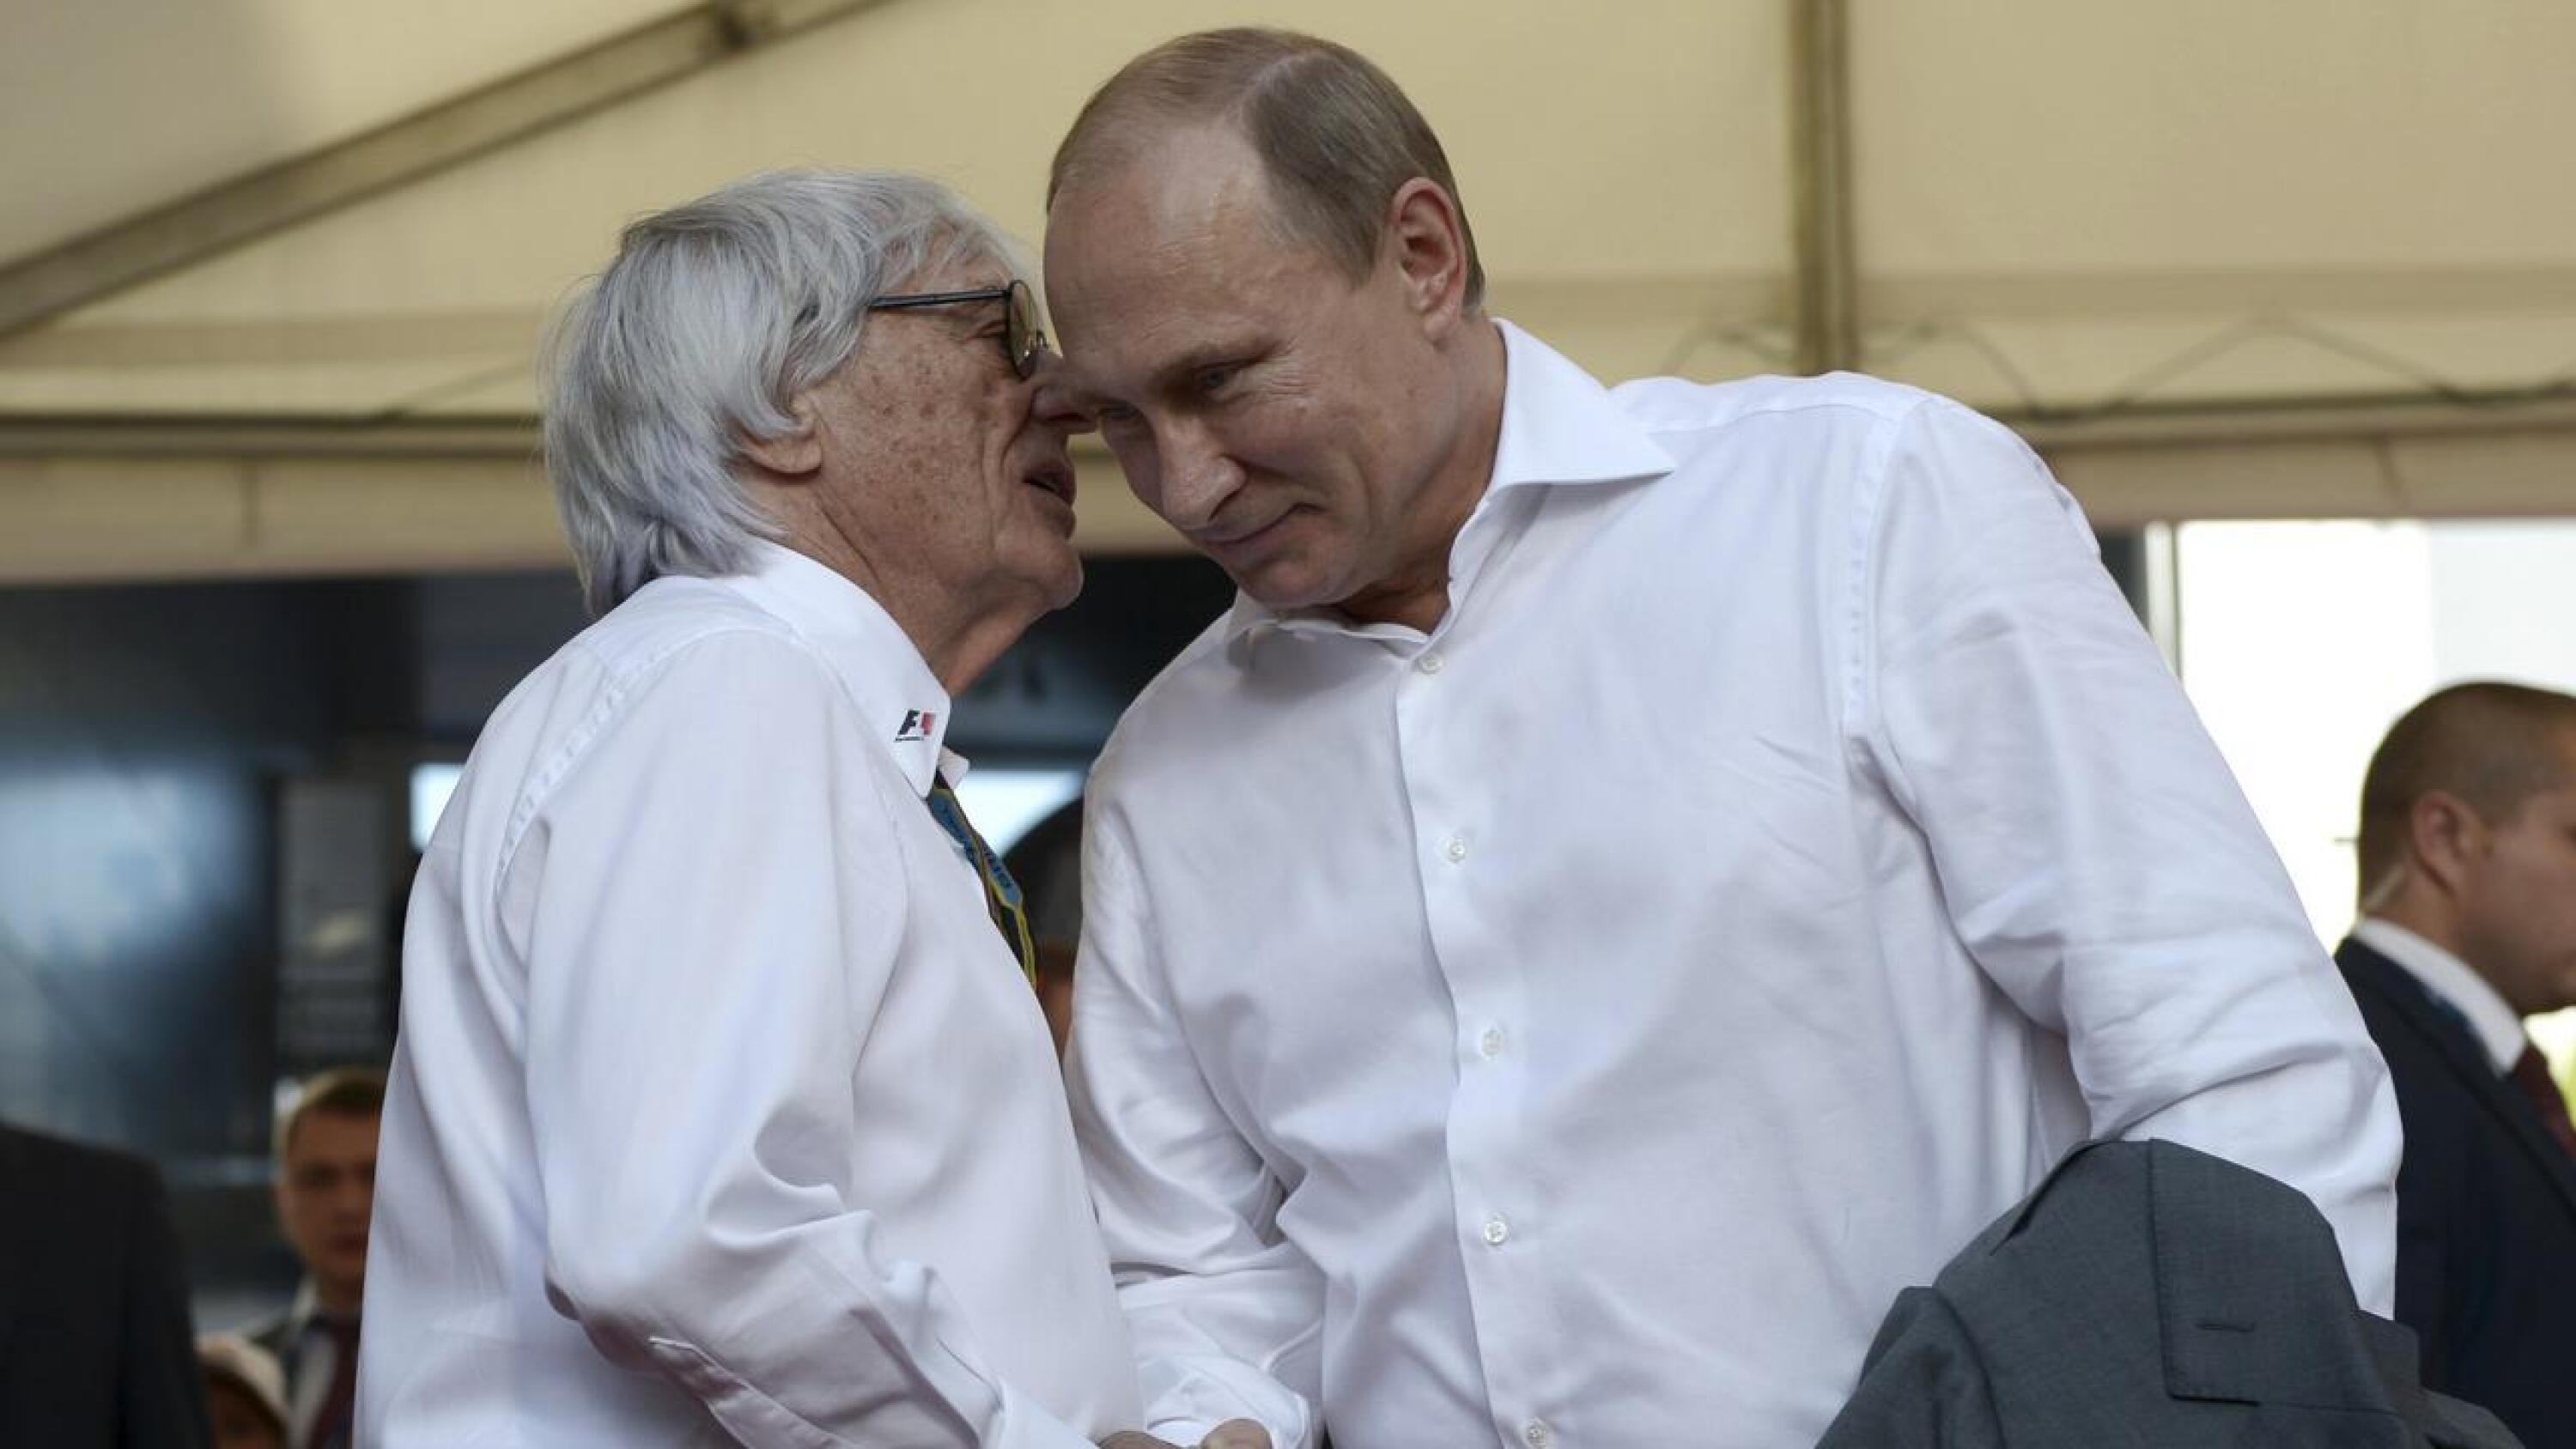 Russia's President Vladimir Putin (R) shakes hands with then Formula One supremo Bernie Ecclestone during the first Russian Grand Prix in Sochi, in this October 12, 2014 file photo